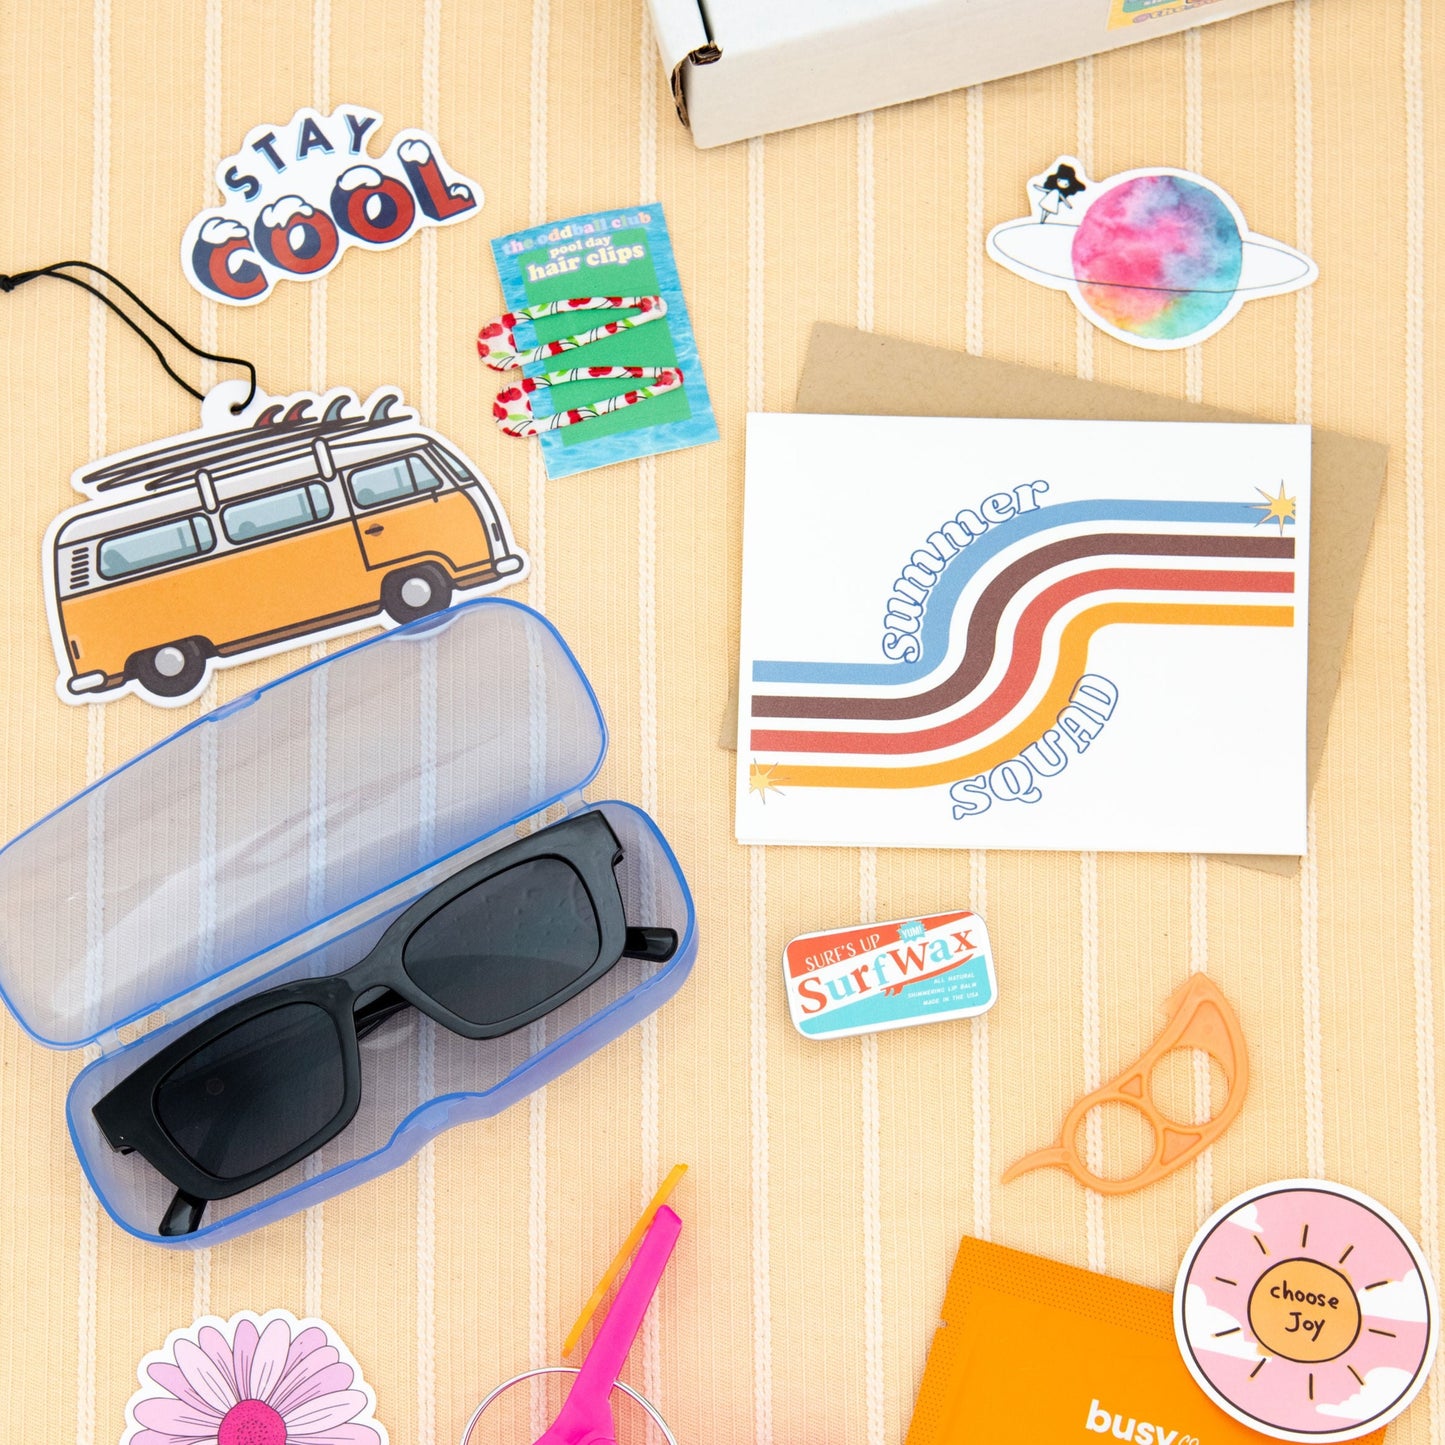 Unleash your inner surfer with this summer subscription box including sunglasses, surf wax chapstick, greeting card, surf wax lip balm tin, orange peeler, stay cool sticker, and surf van air freshener.